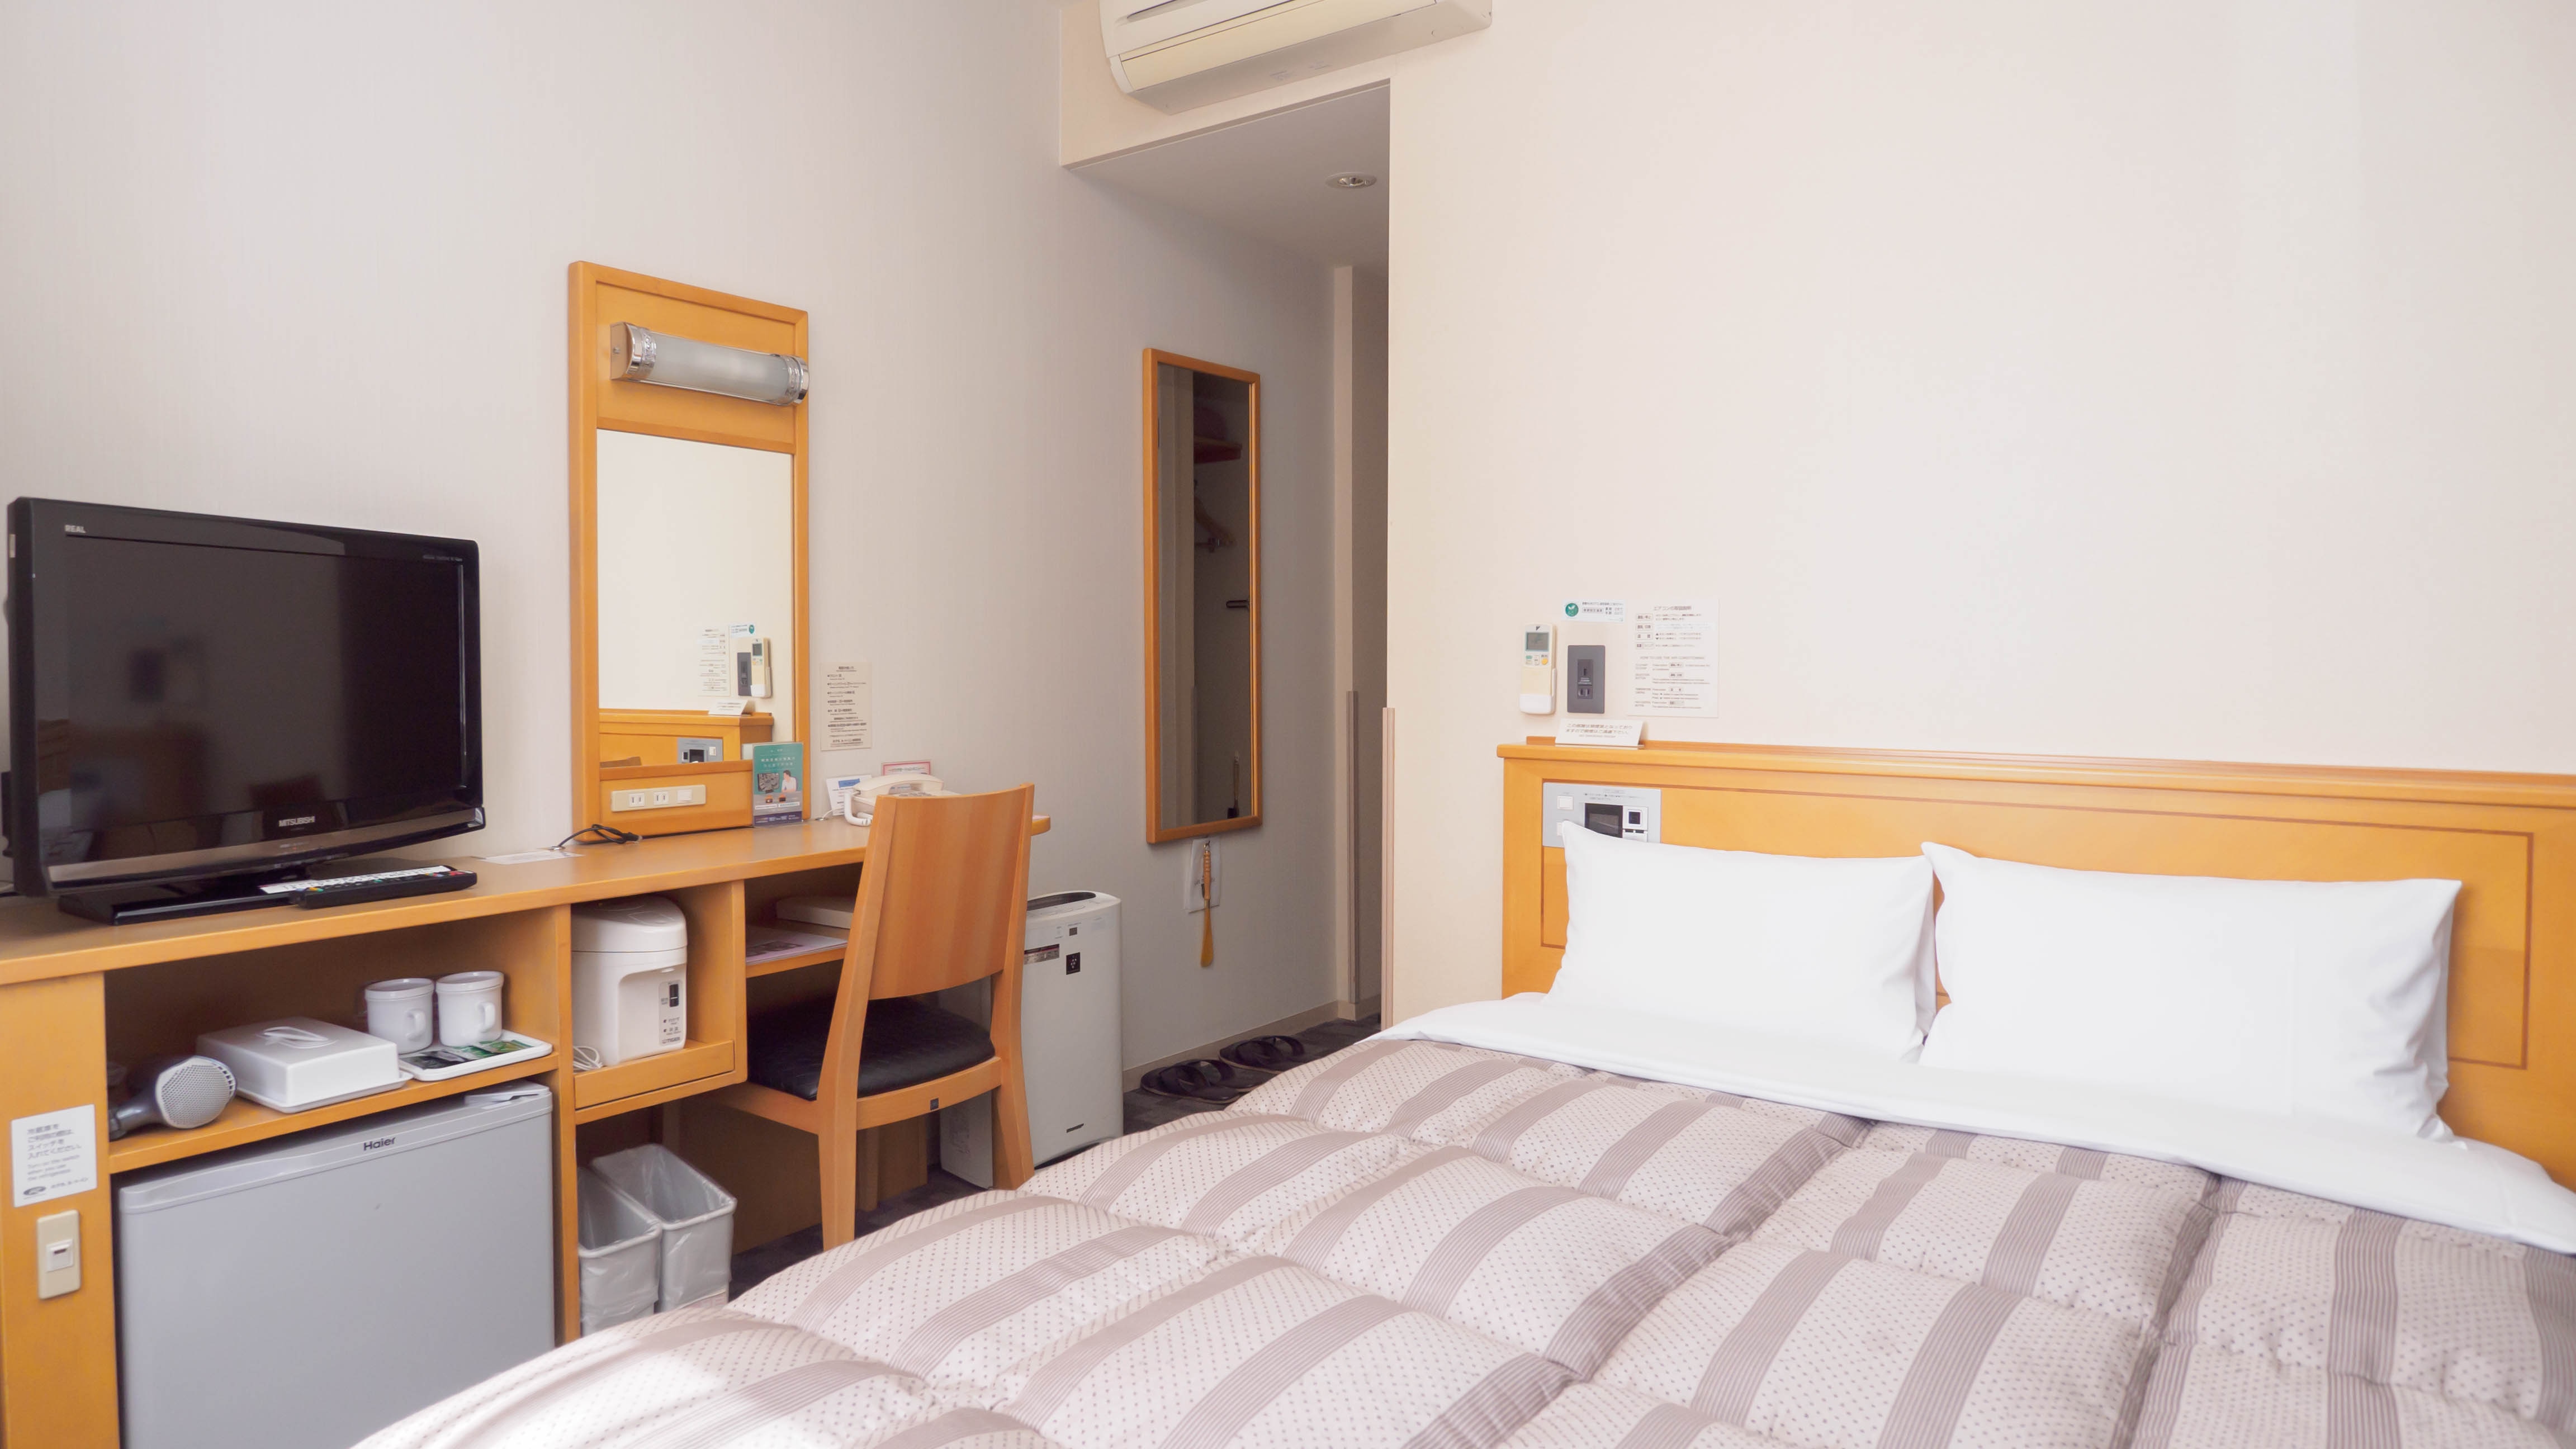 Semi-double room, ideal for couples and couples